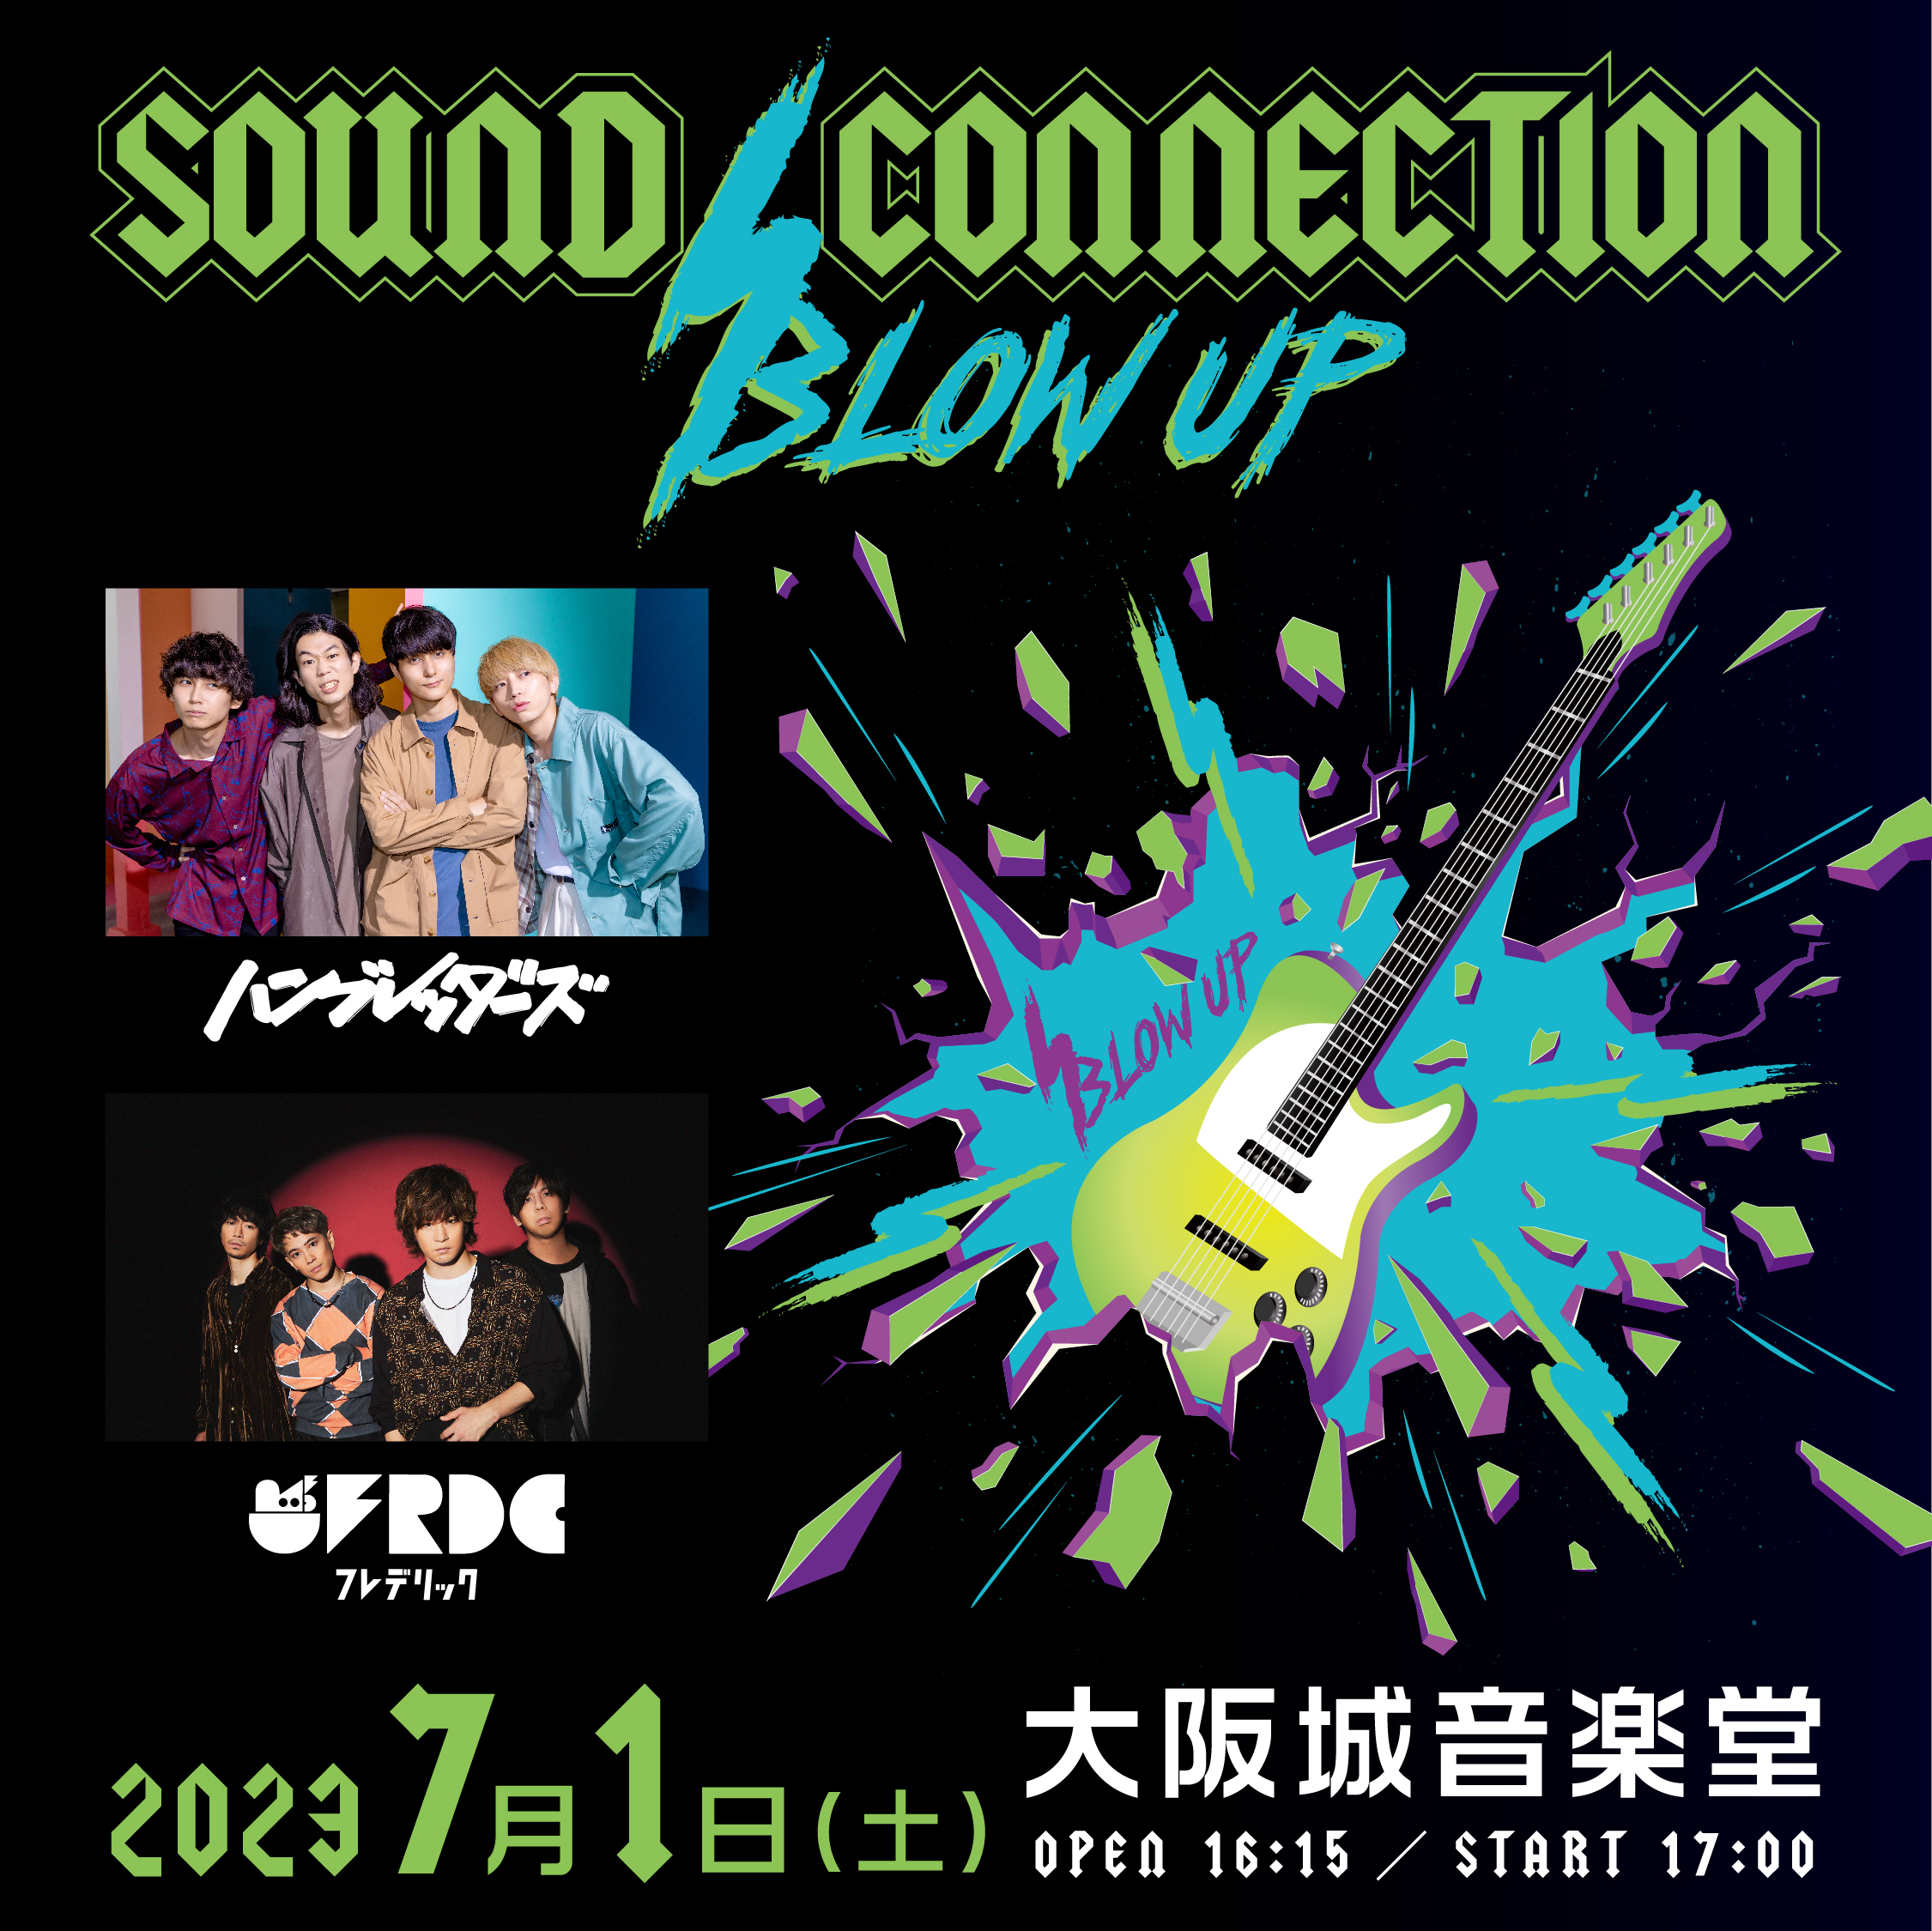 『SOUND CONNECTION -BLOW UP- 』